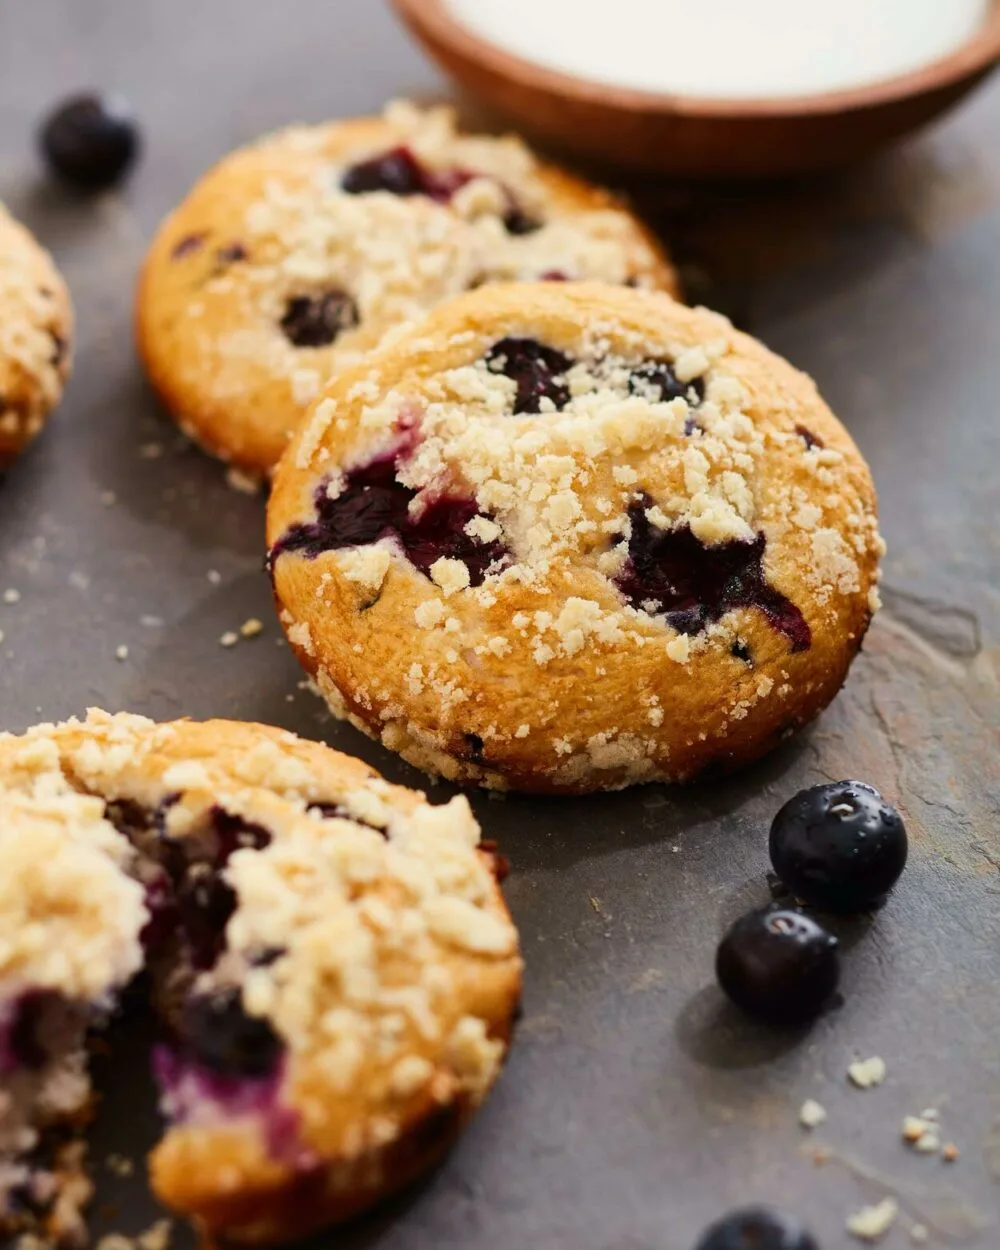 Blueberry muffins topped with coarse sugar